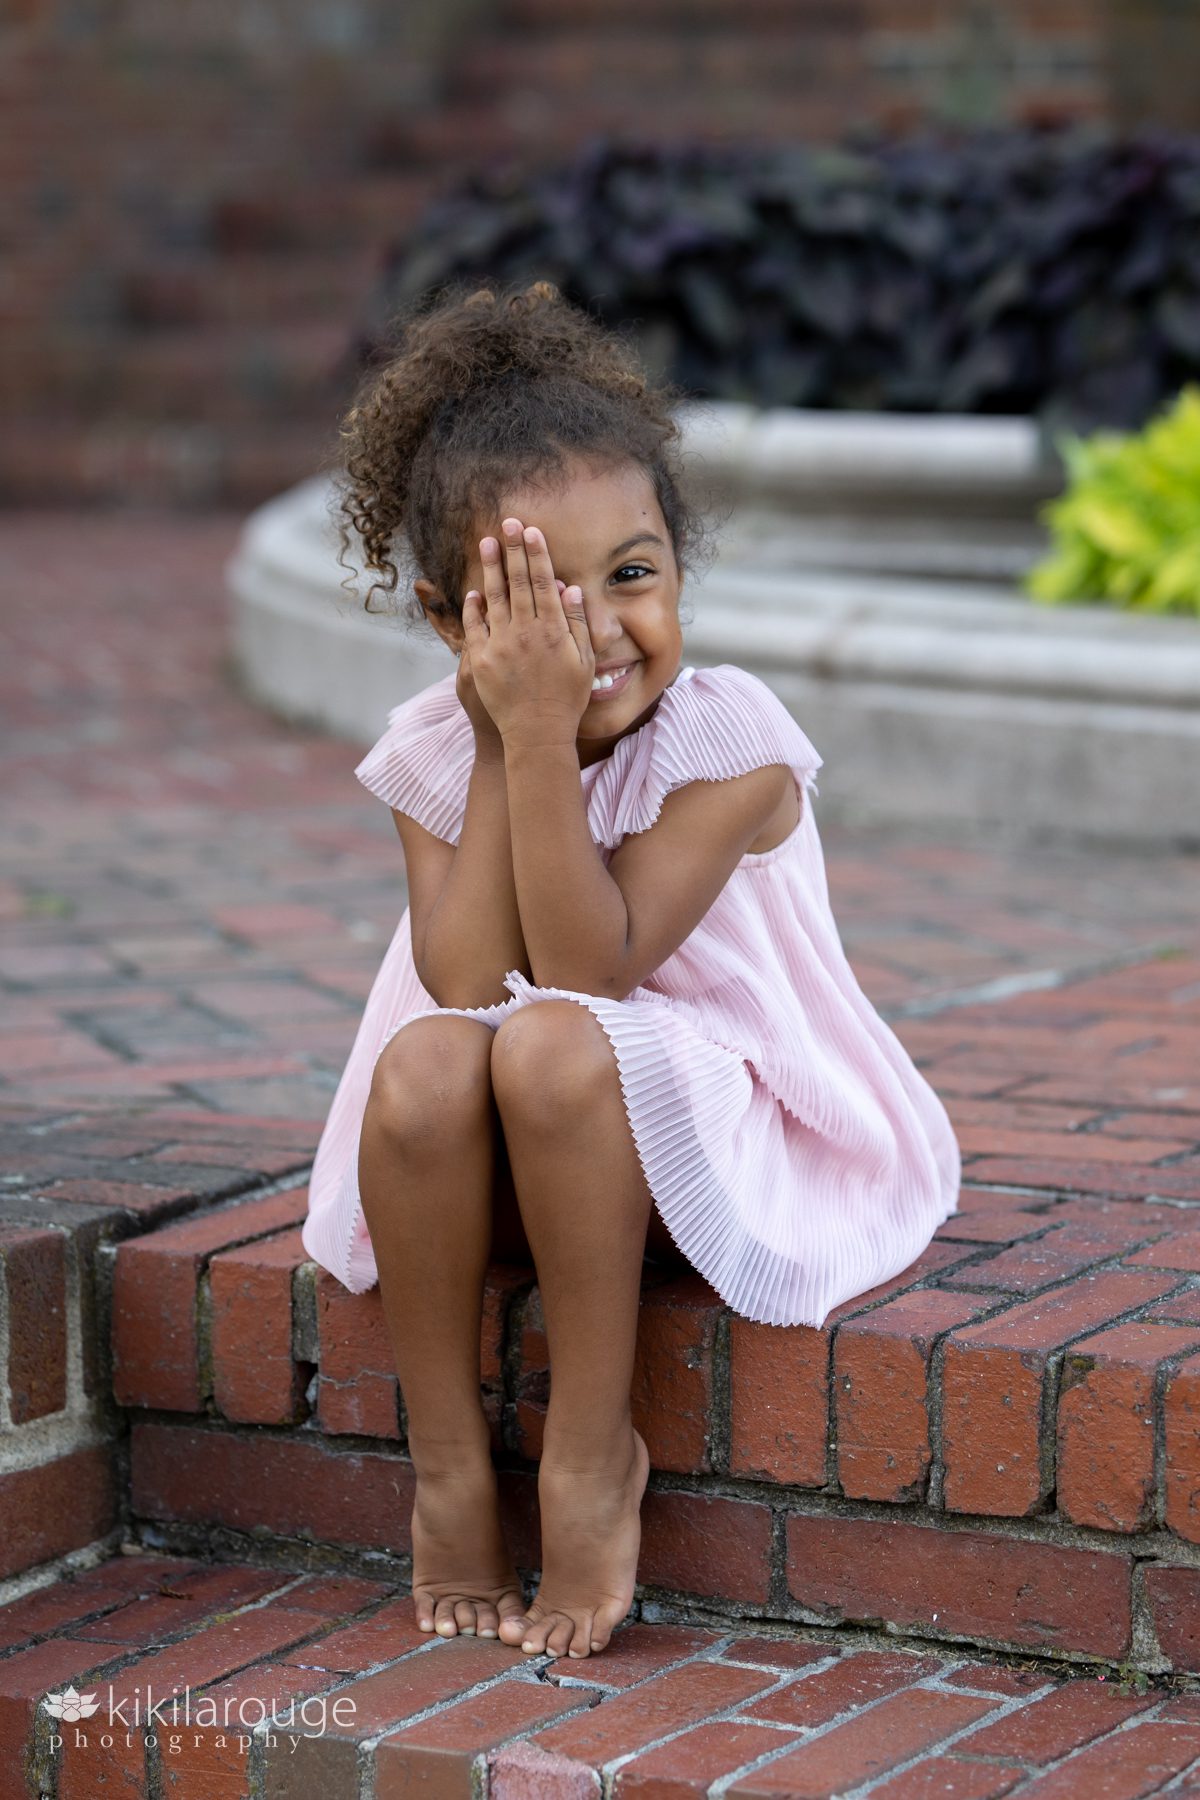 Little girl sitting on brick steps smiling with one eye covered with her hand